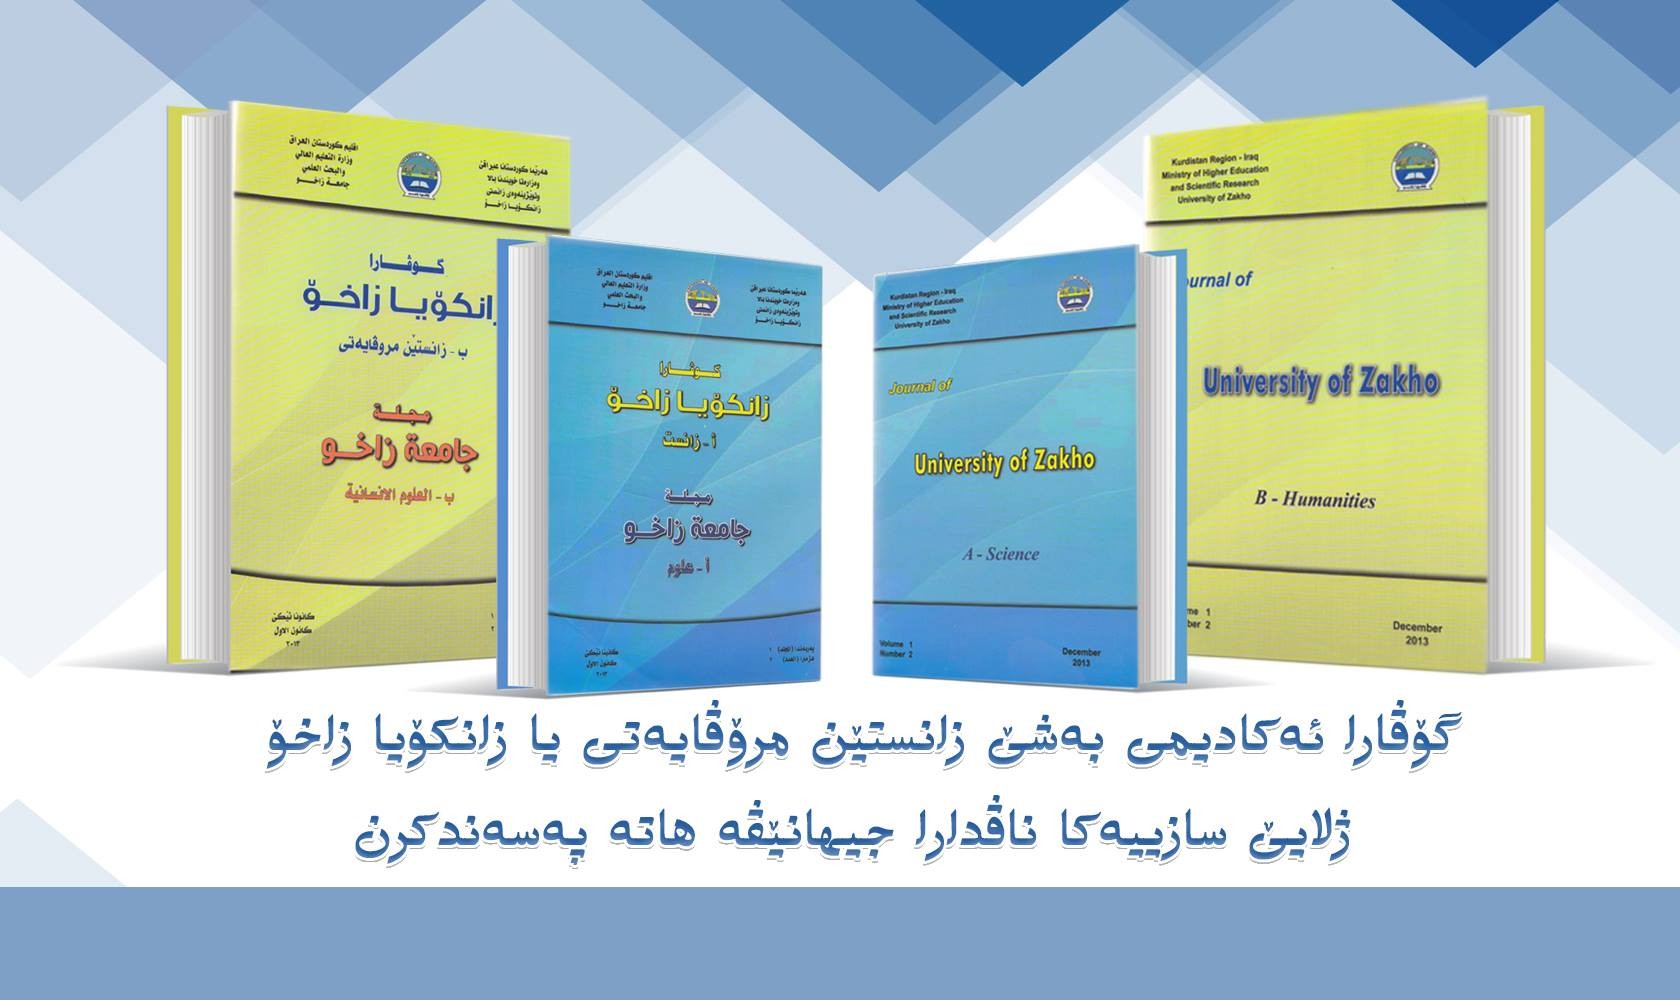 The Humanities Journal of University of Zakho Has Been Indexed By DOAJ